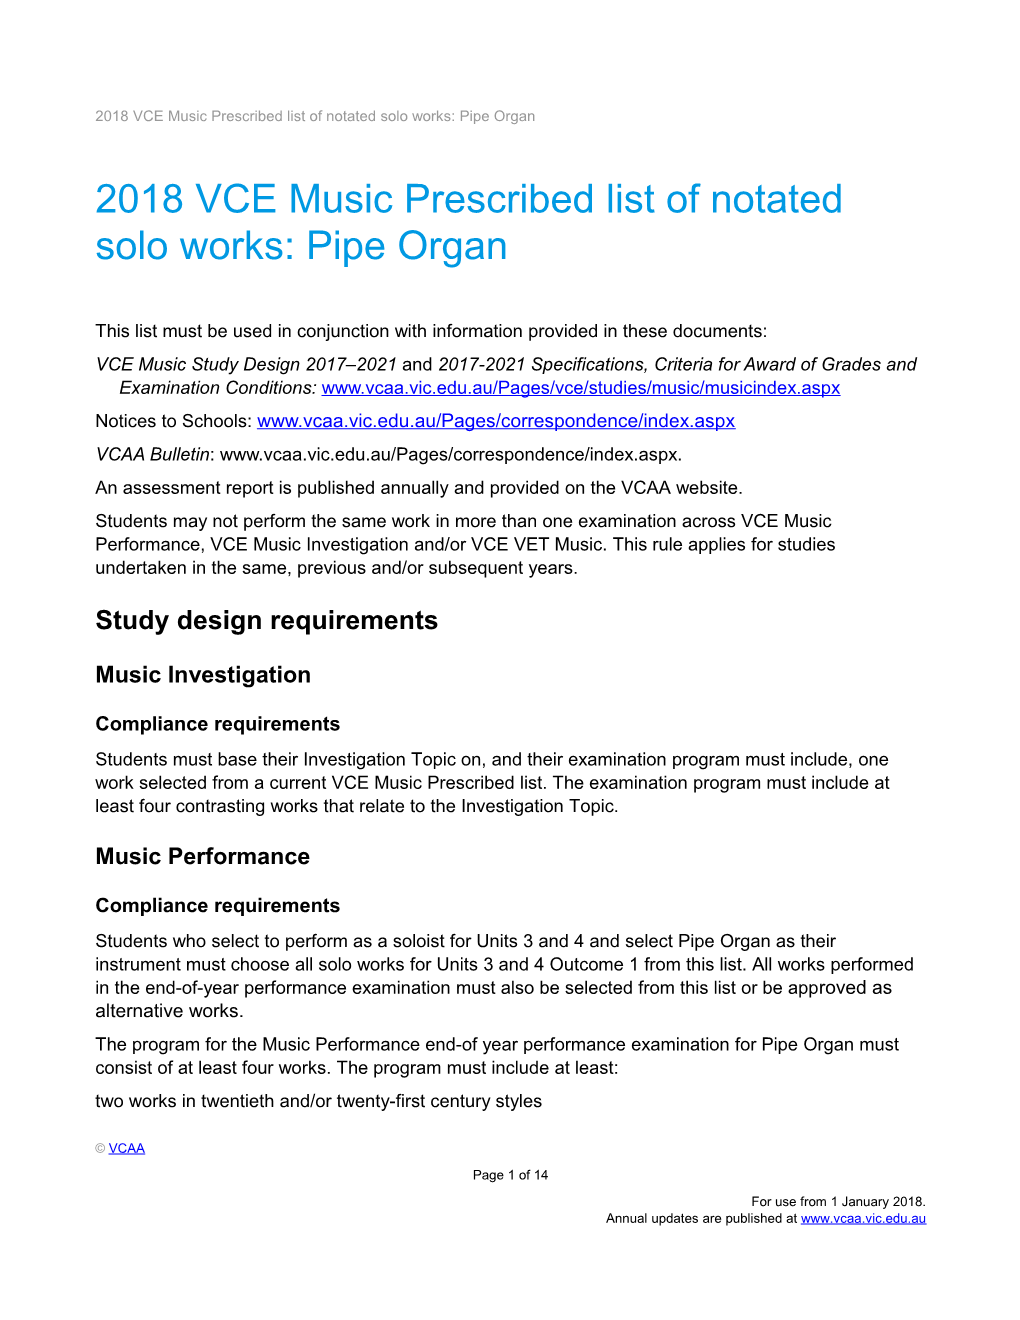 2018 VCE Music Prescribed List of Notated Solo Works: Pipe Organ